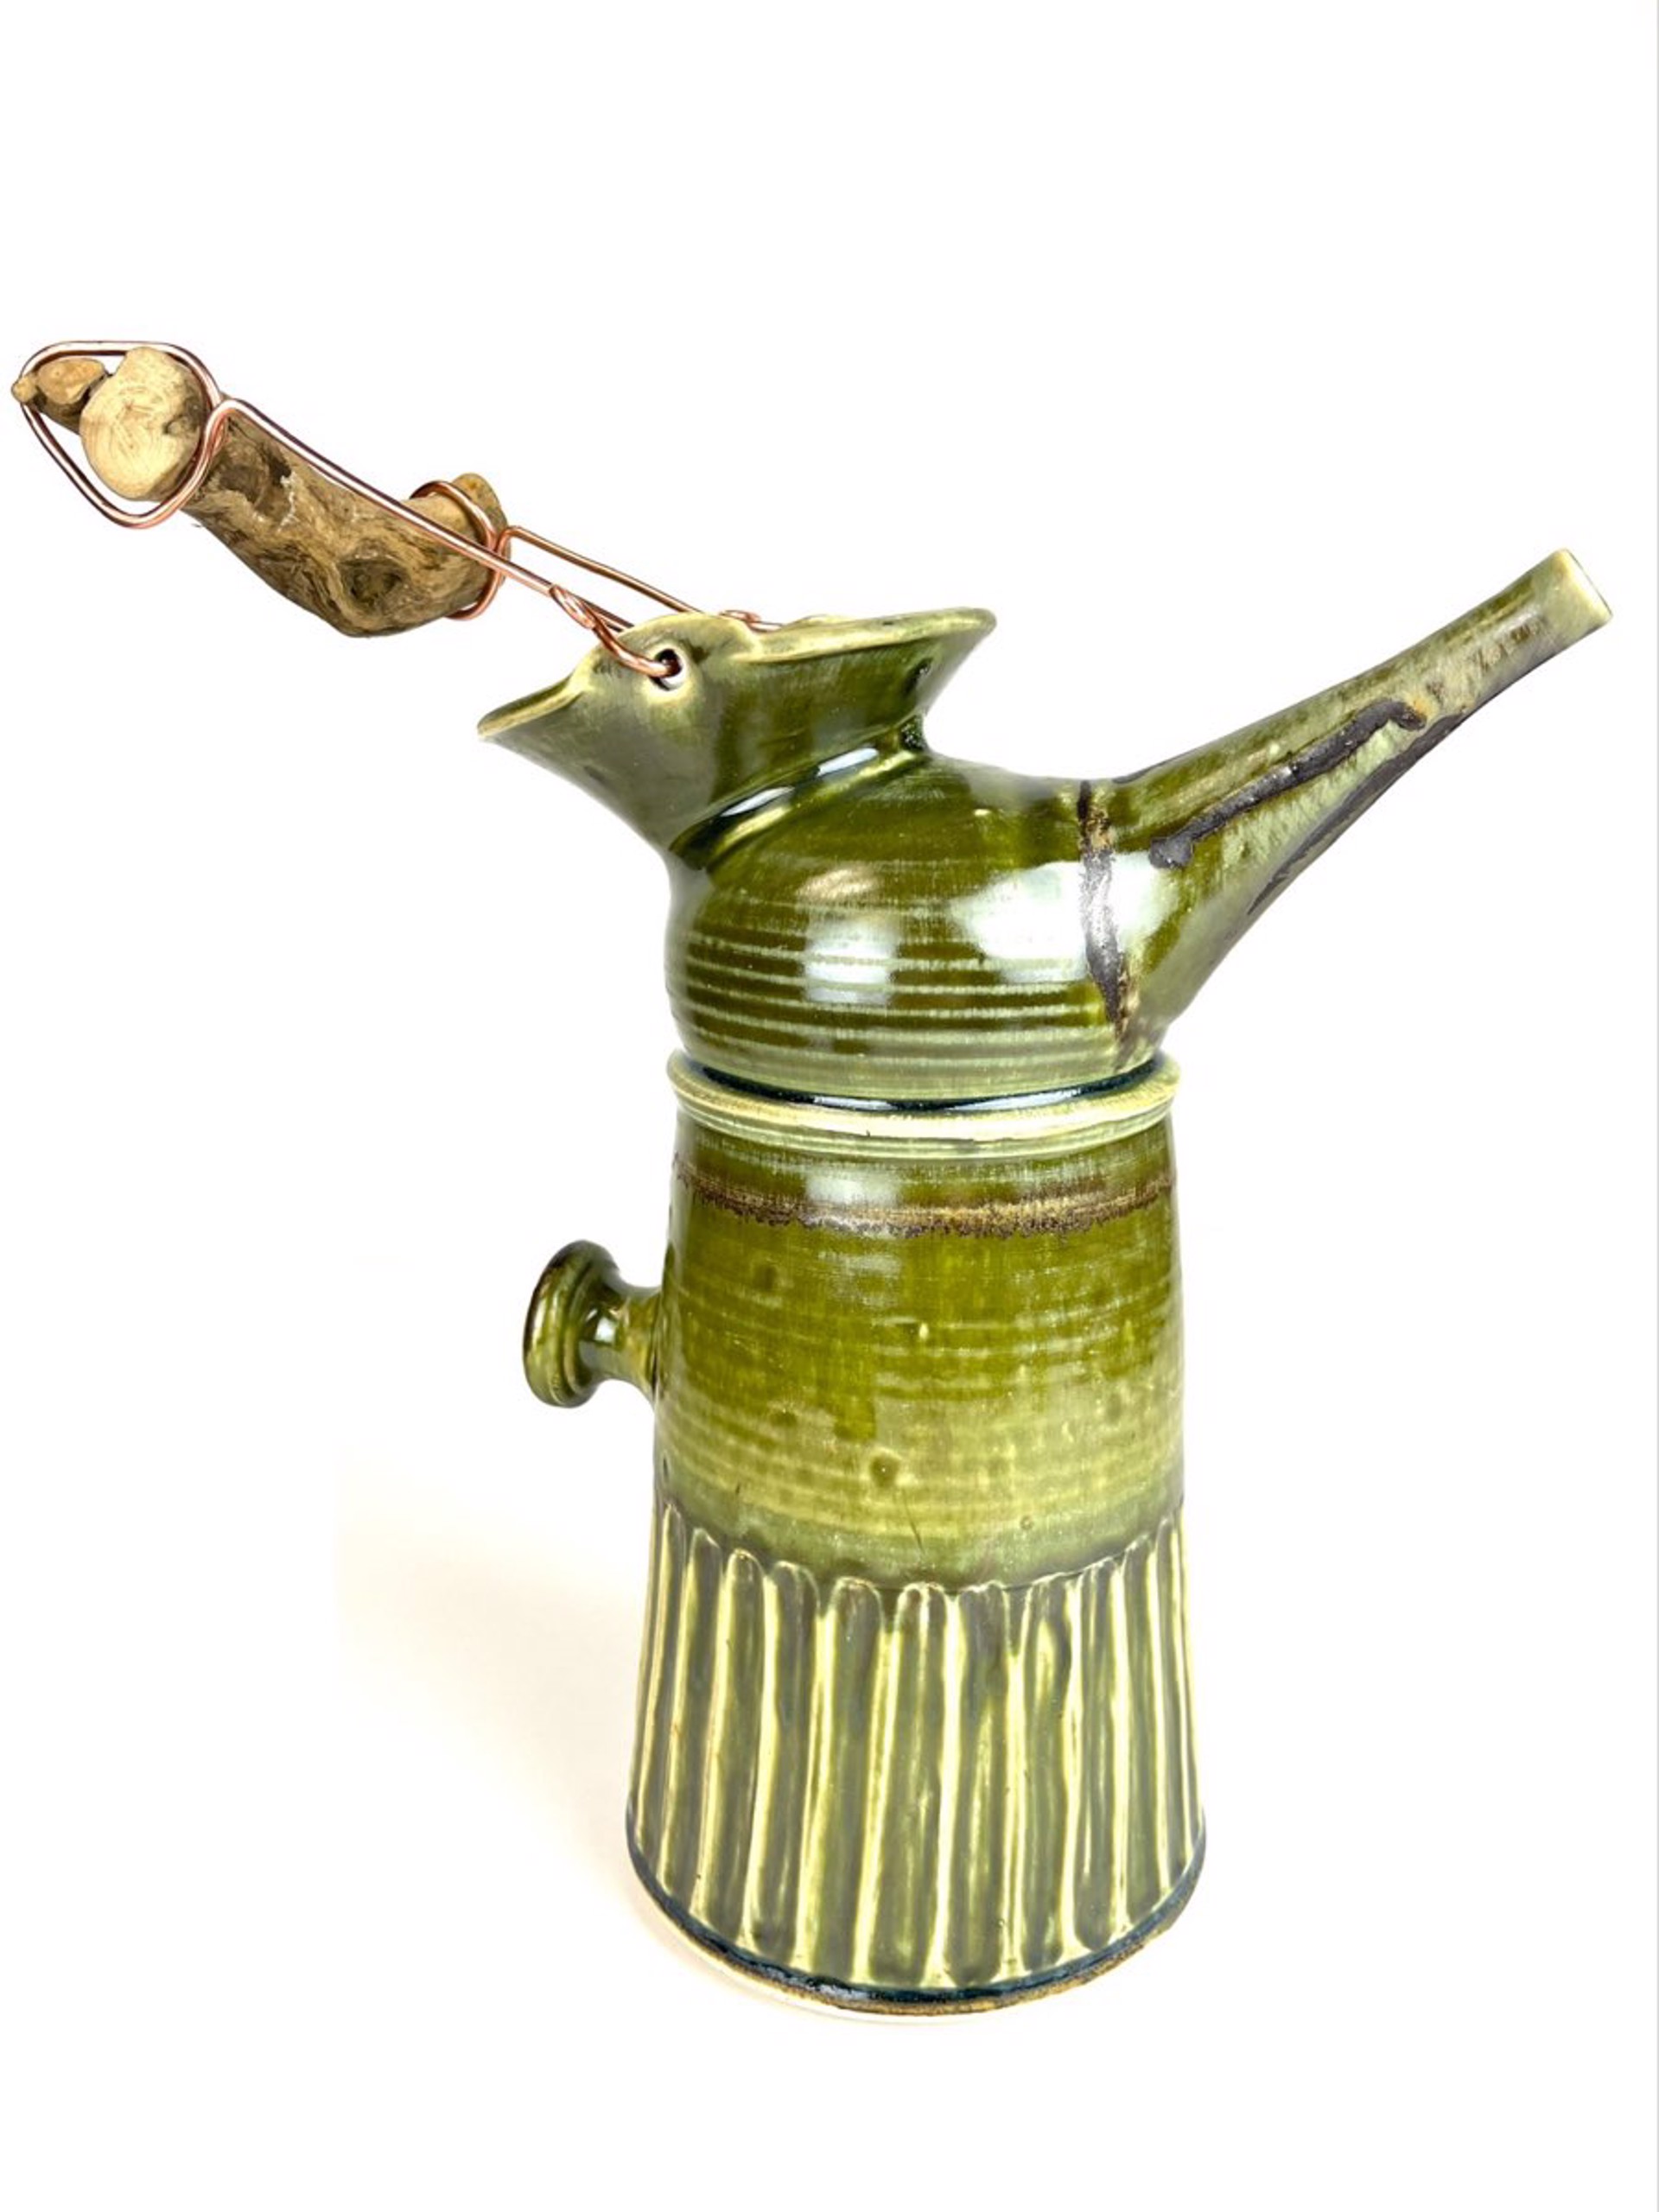 Thrown and Altered Watering Vessel by Mary Lynn Portera